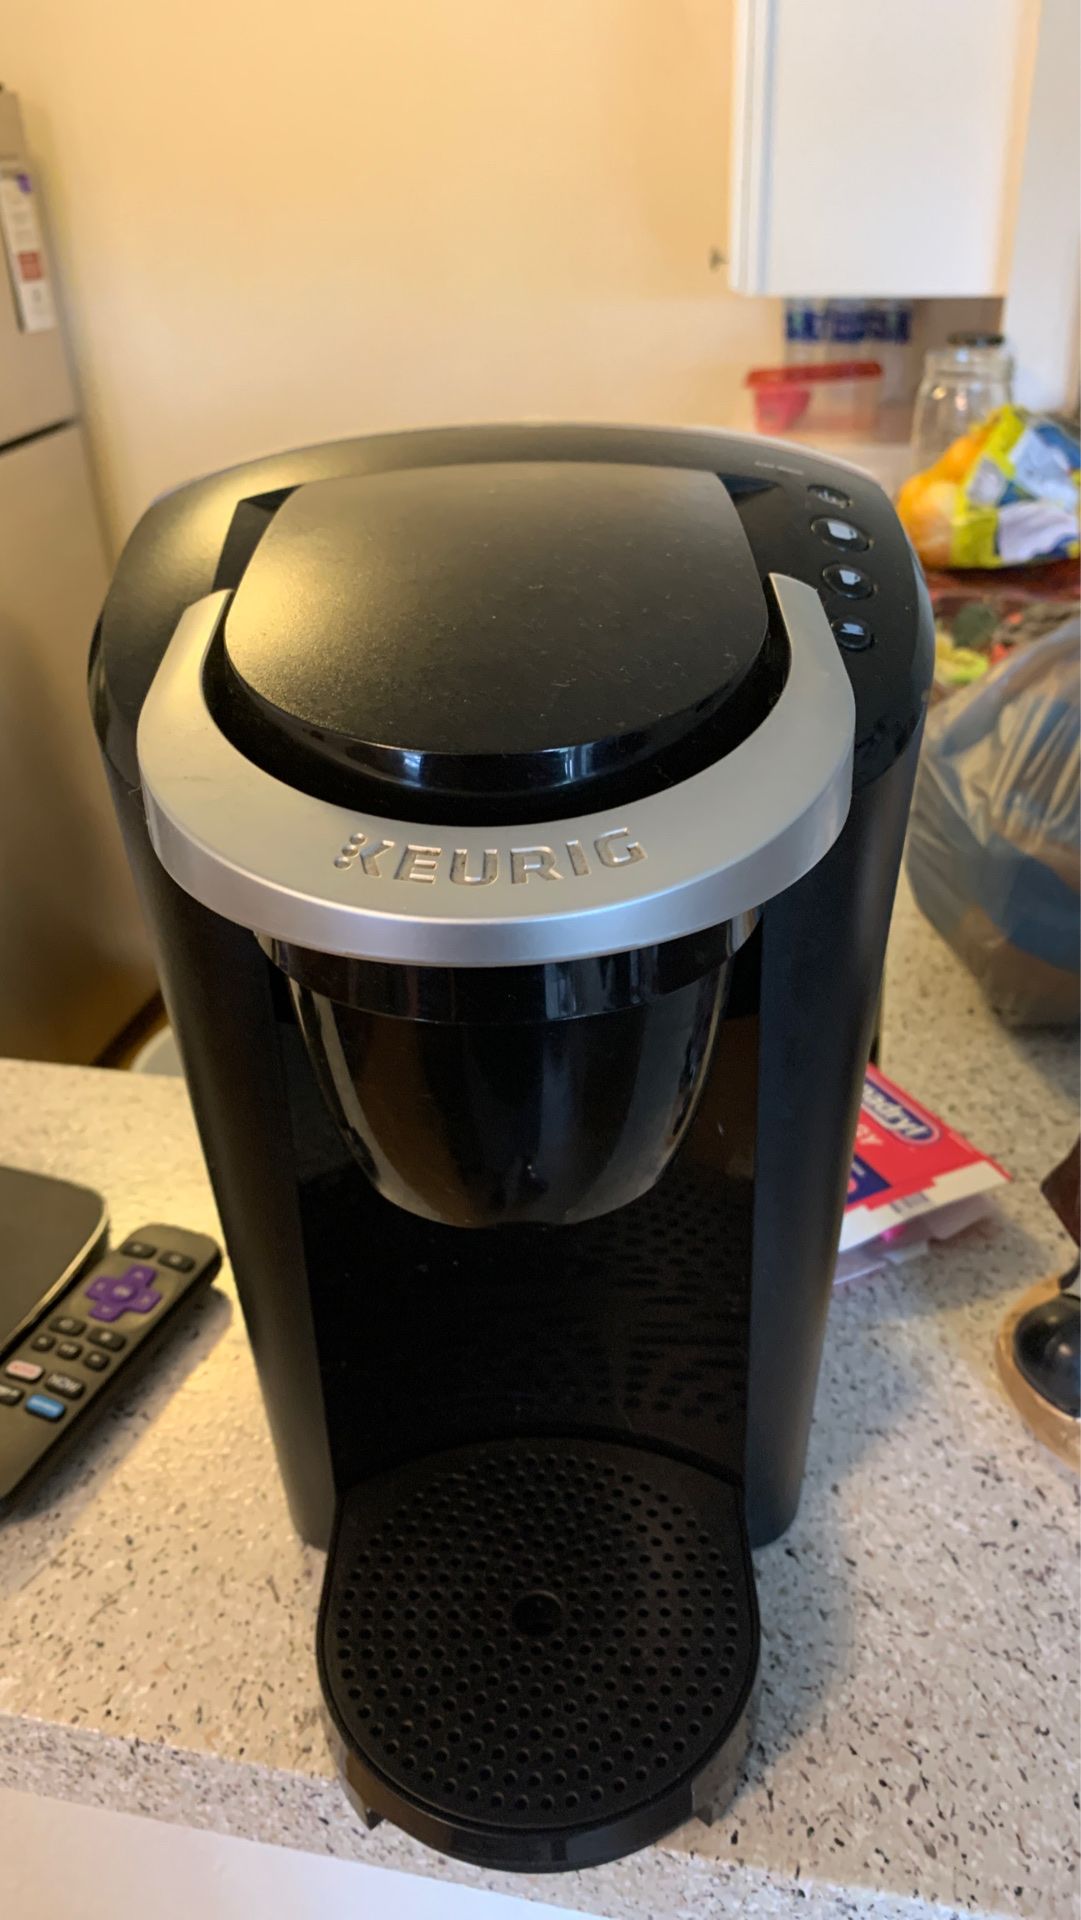 Keurig coffee and hot coco maker